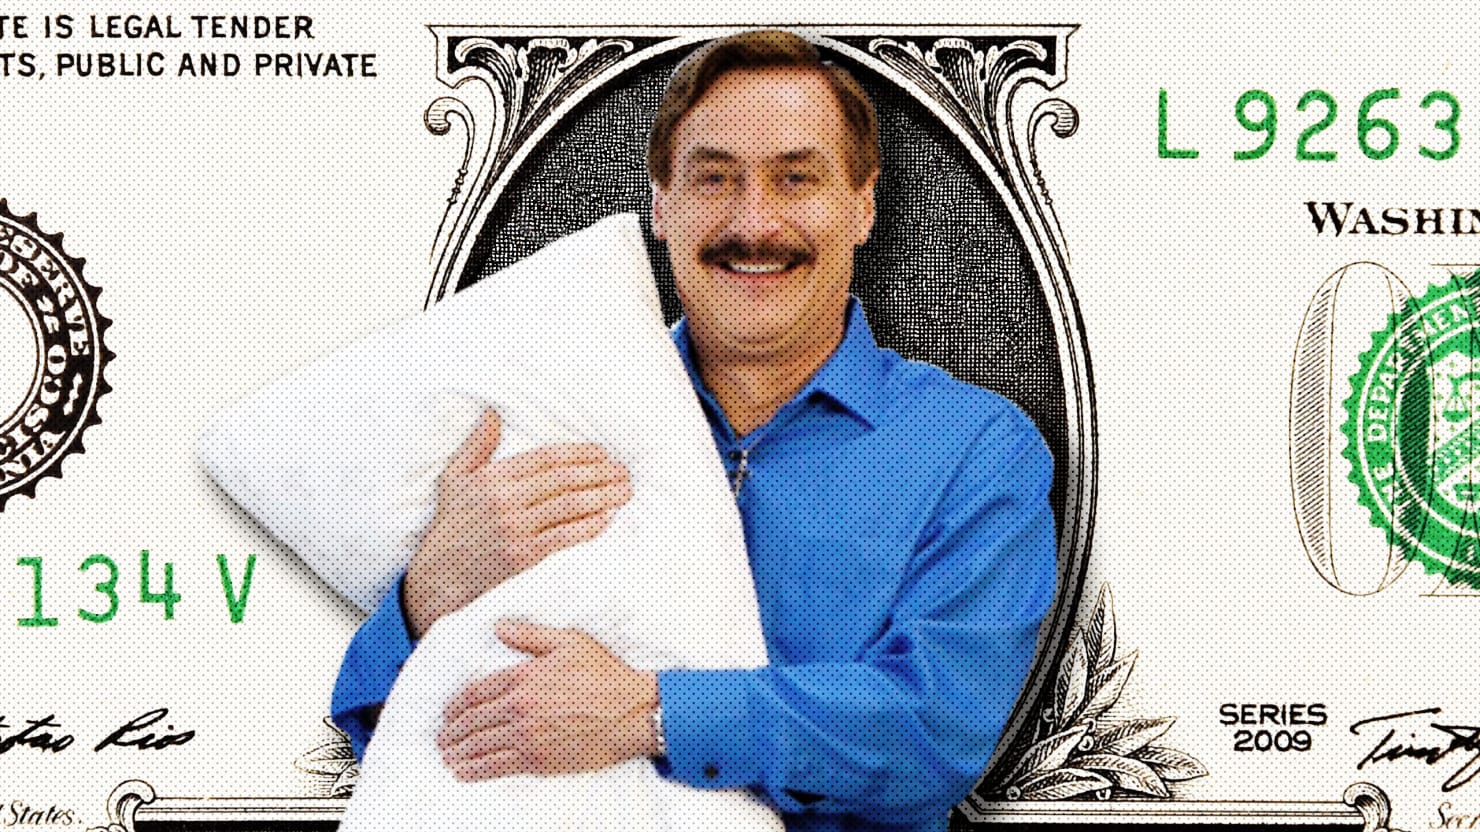 michael lindell my pillow